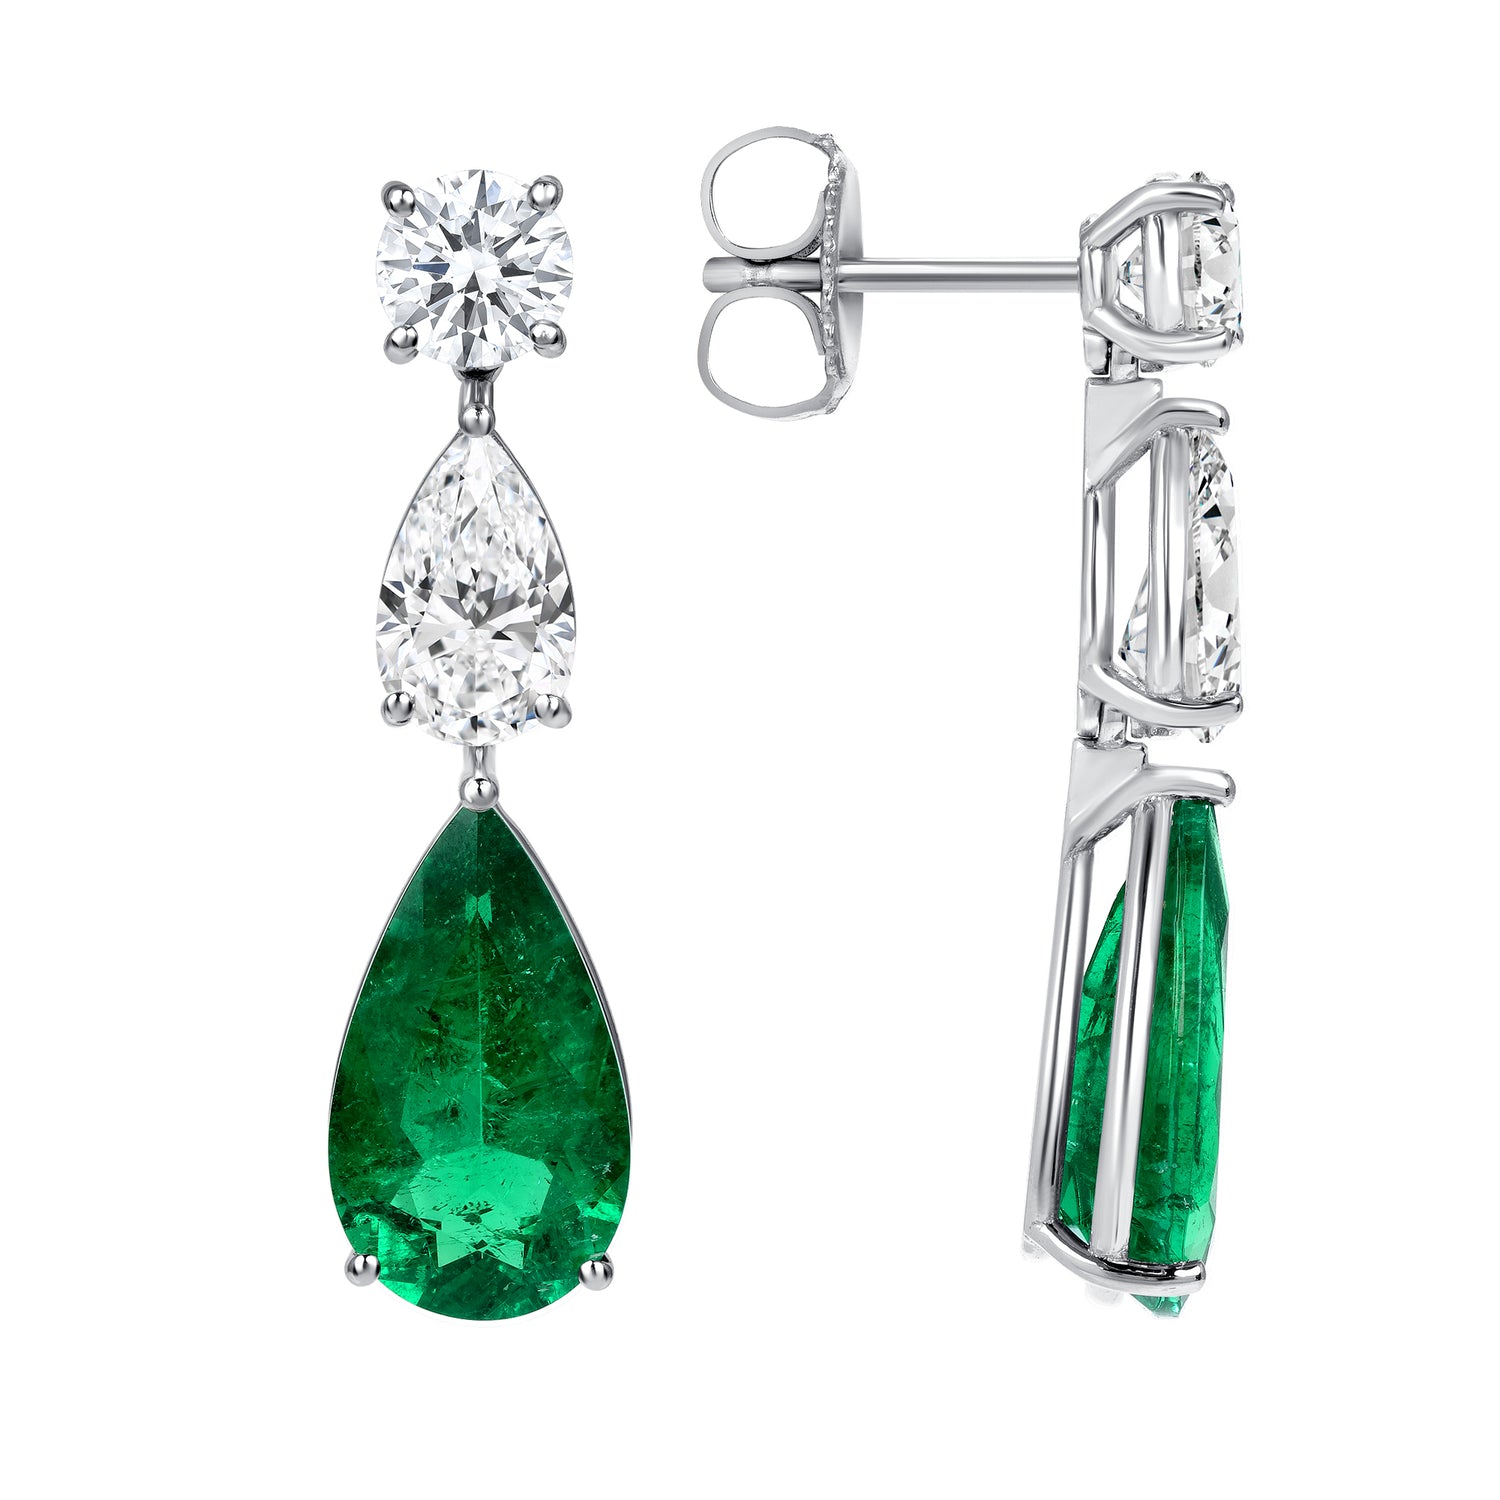 Platinum Round Brilliant and Pear Shape Diamonds and Pear Shape Colombian Emerald Drop Earrings